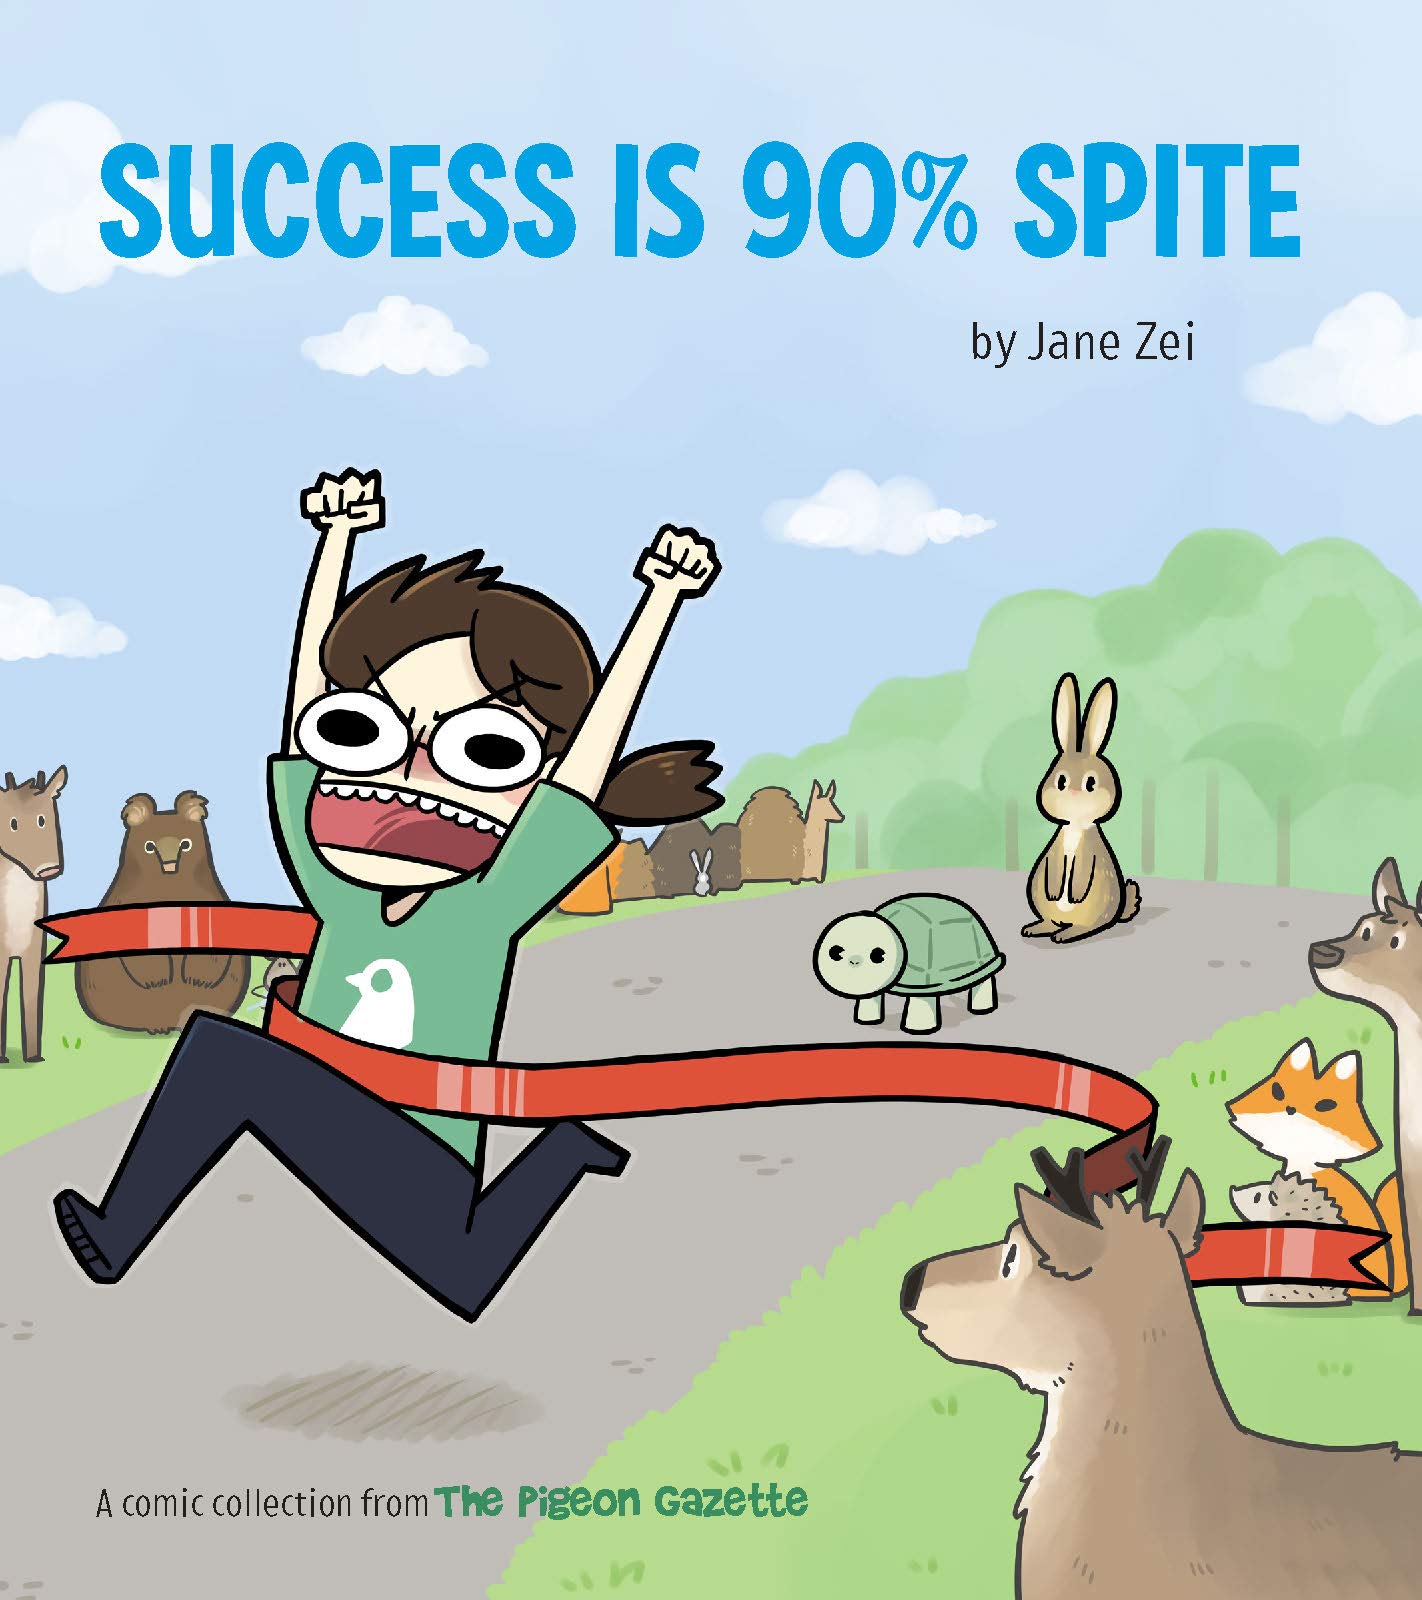 Success Is 90% Spite: (The Pigeon Gazette Webcomic Book, Funny Web Comic Gift by @thepigeongazette)